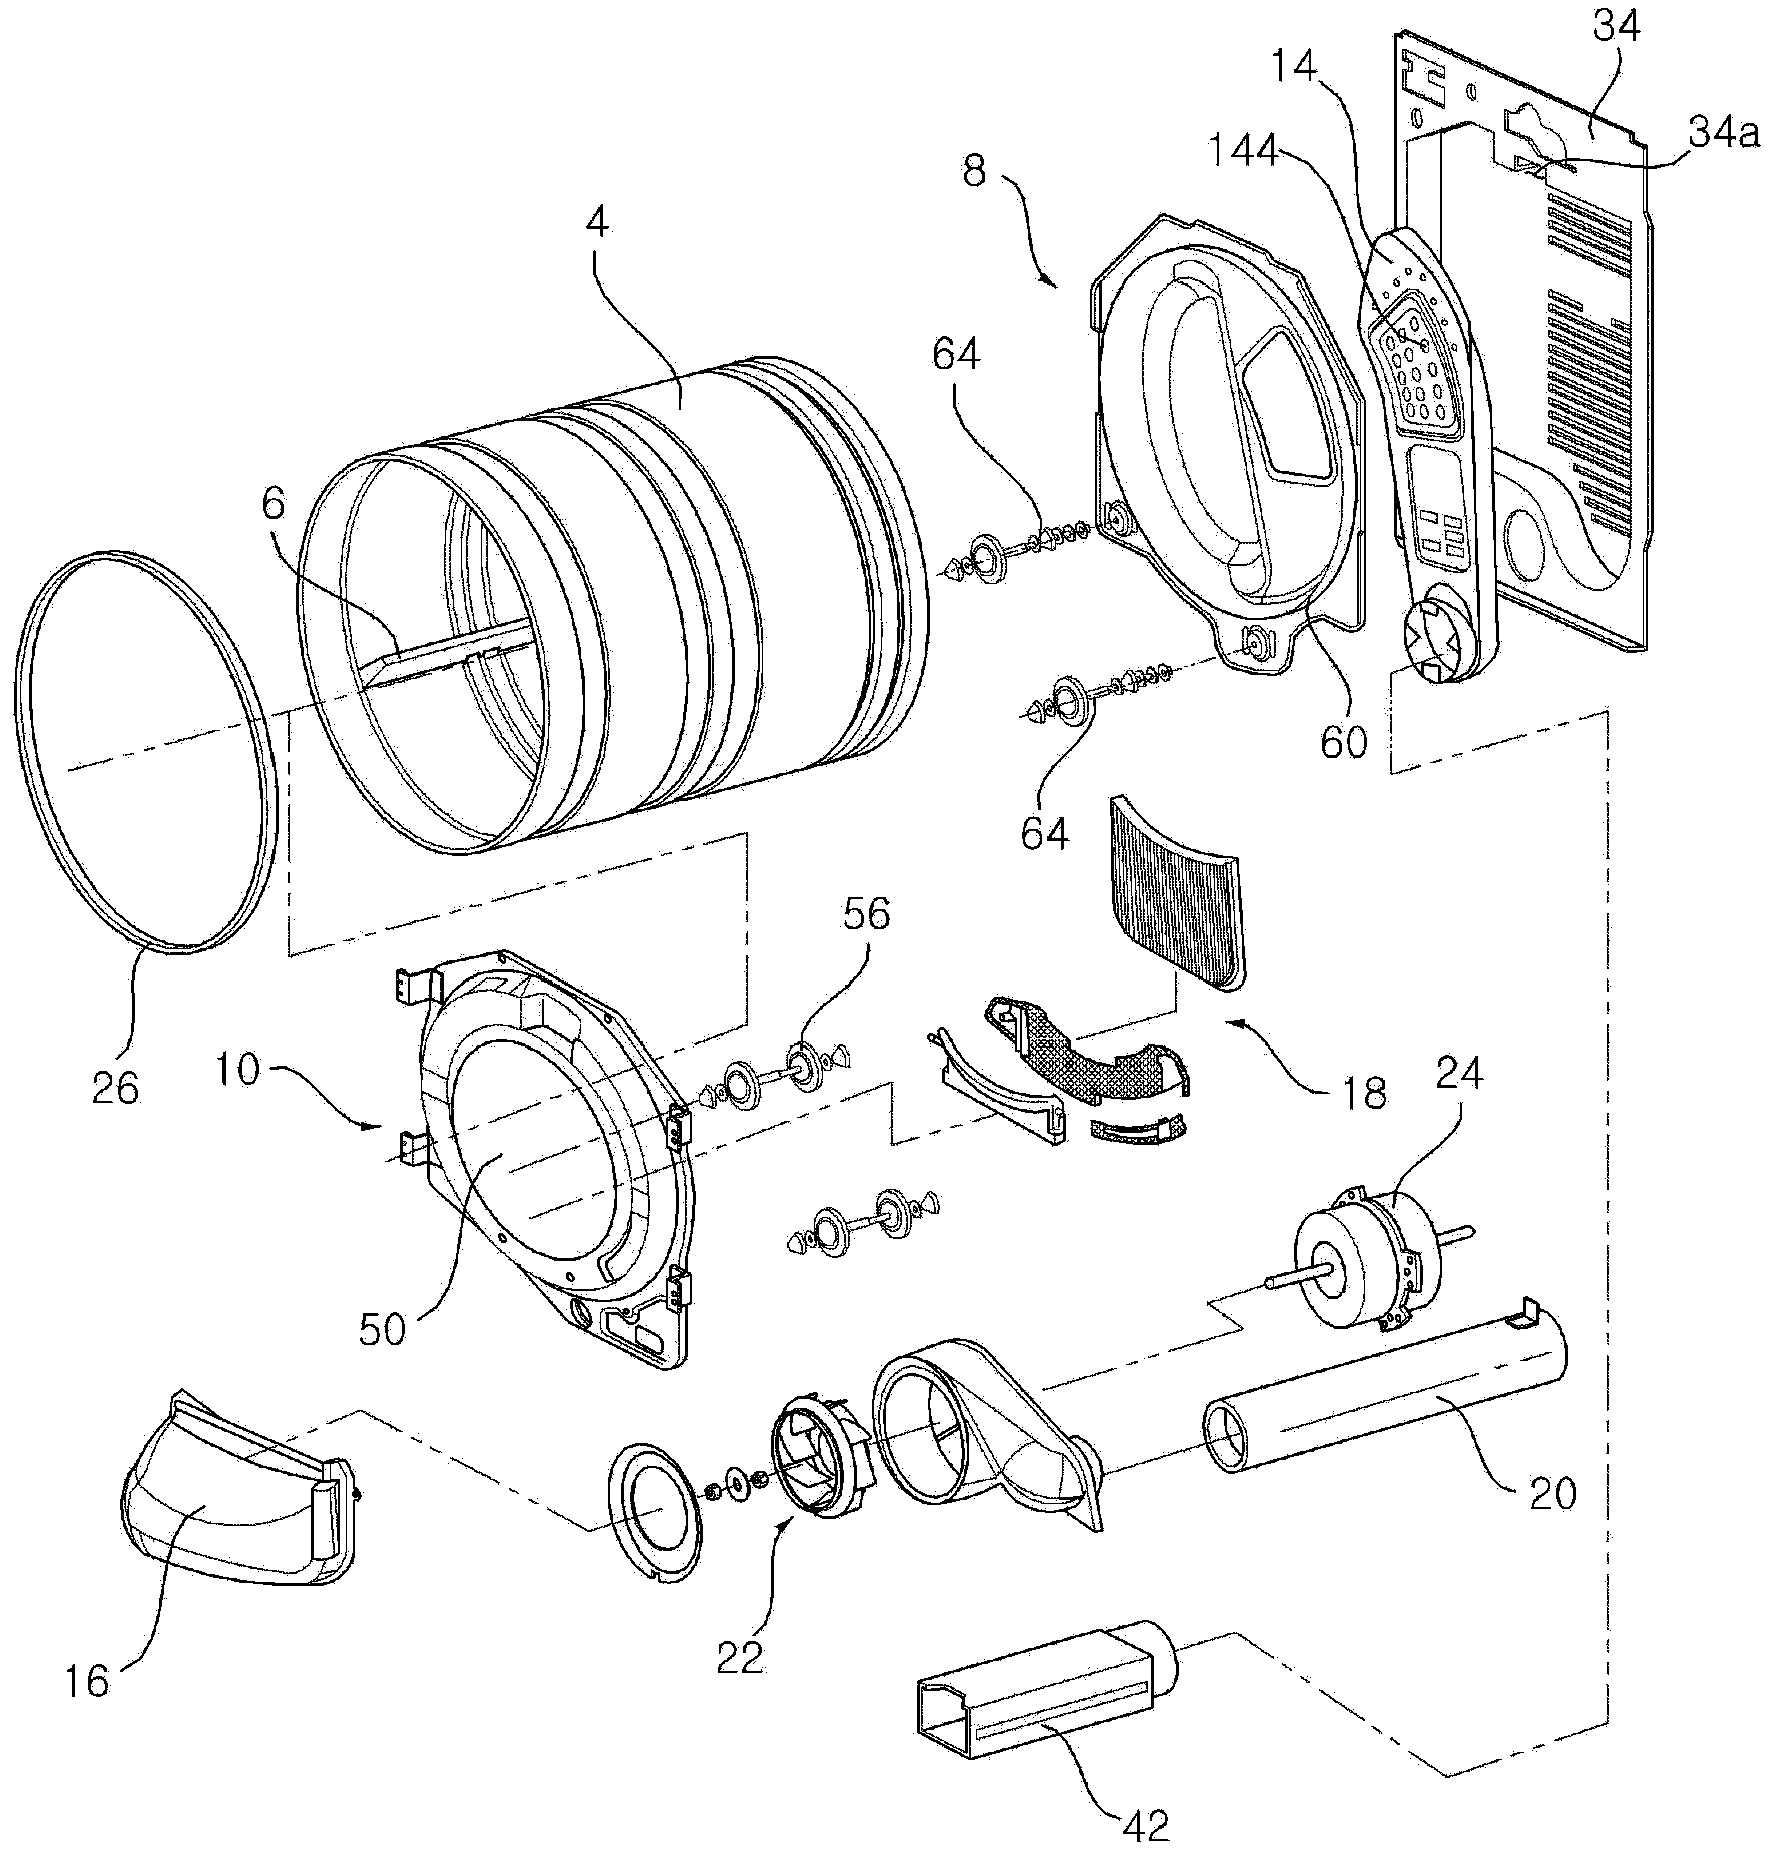 Steam spraying apparatus and clothing drying machine including the same